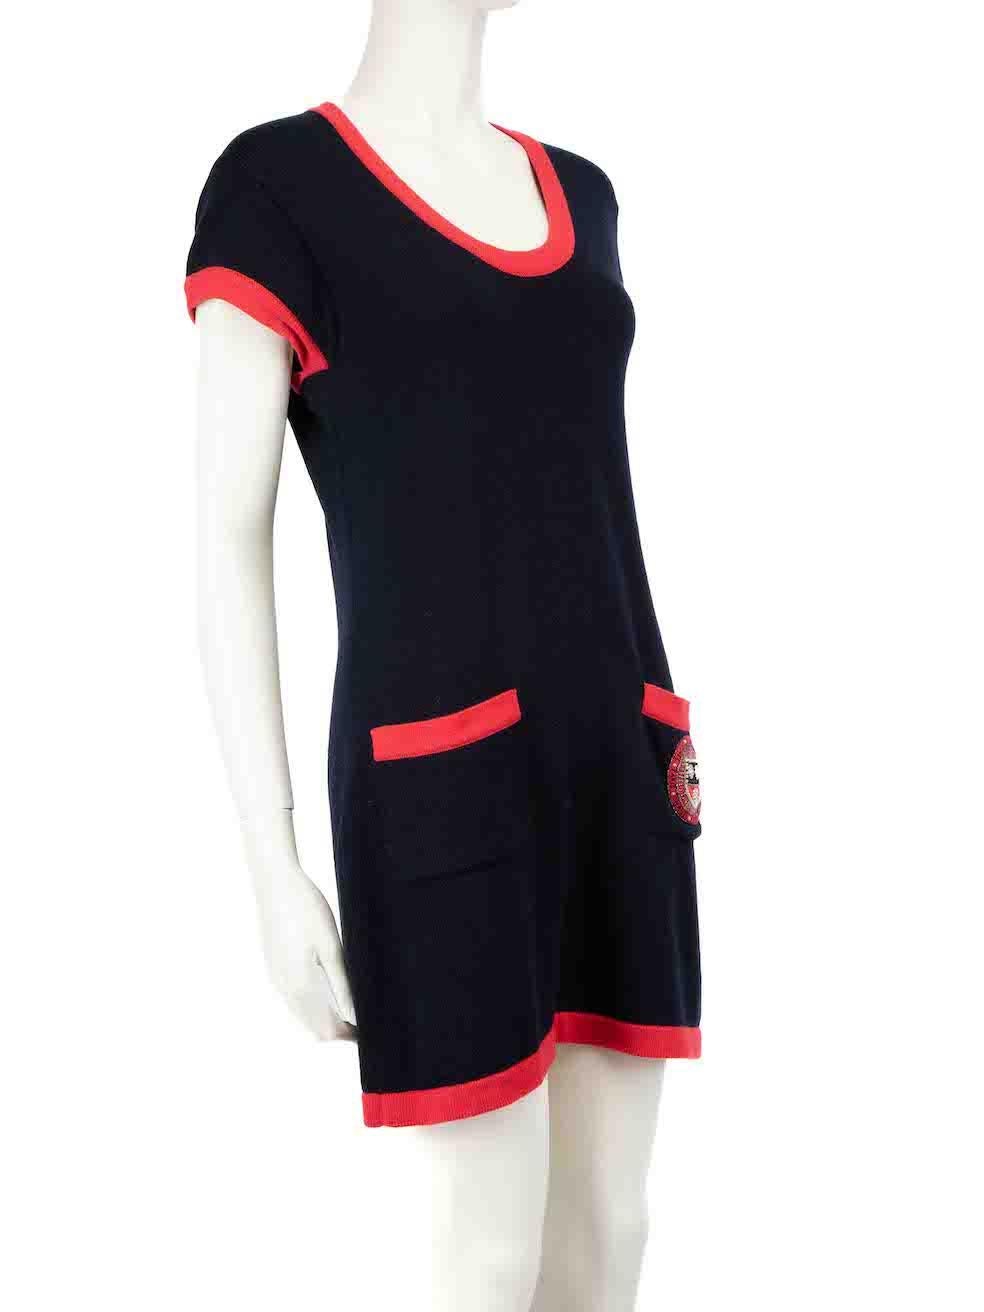 CONDITION is Very good. Minimal wear to dress is evident. Minimal wear to the embellishment with the pearlescent finish having faded on this used Chanel designer resale item.
 
 
 
 Details
 
 
 A/W 2007
 
 Navy
 
 Cashmere
 
 Mini dress
 
 Knitted